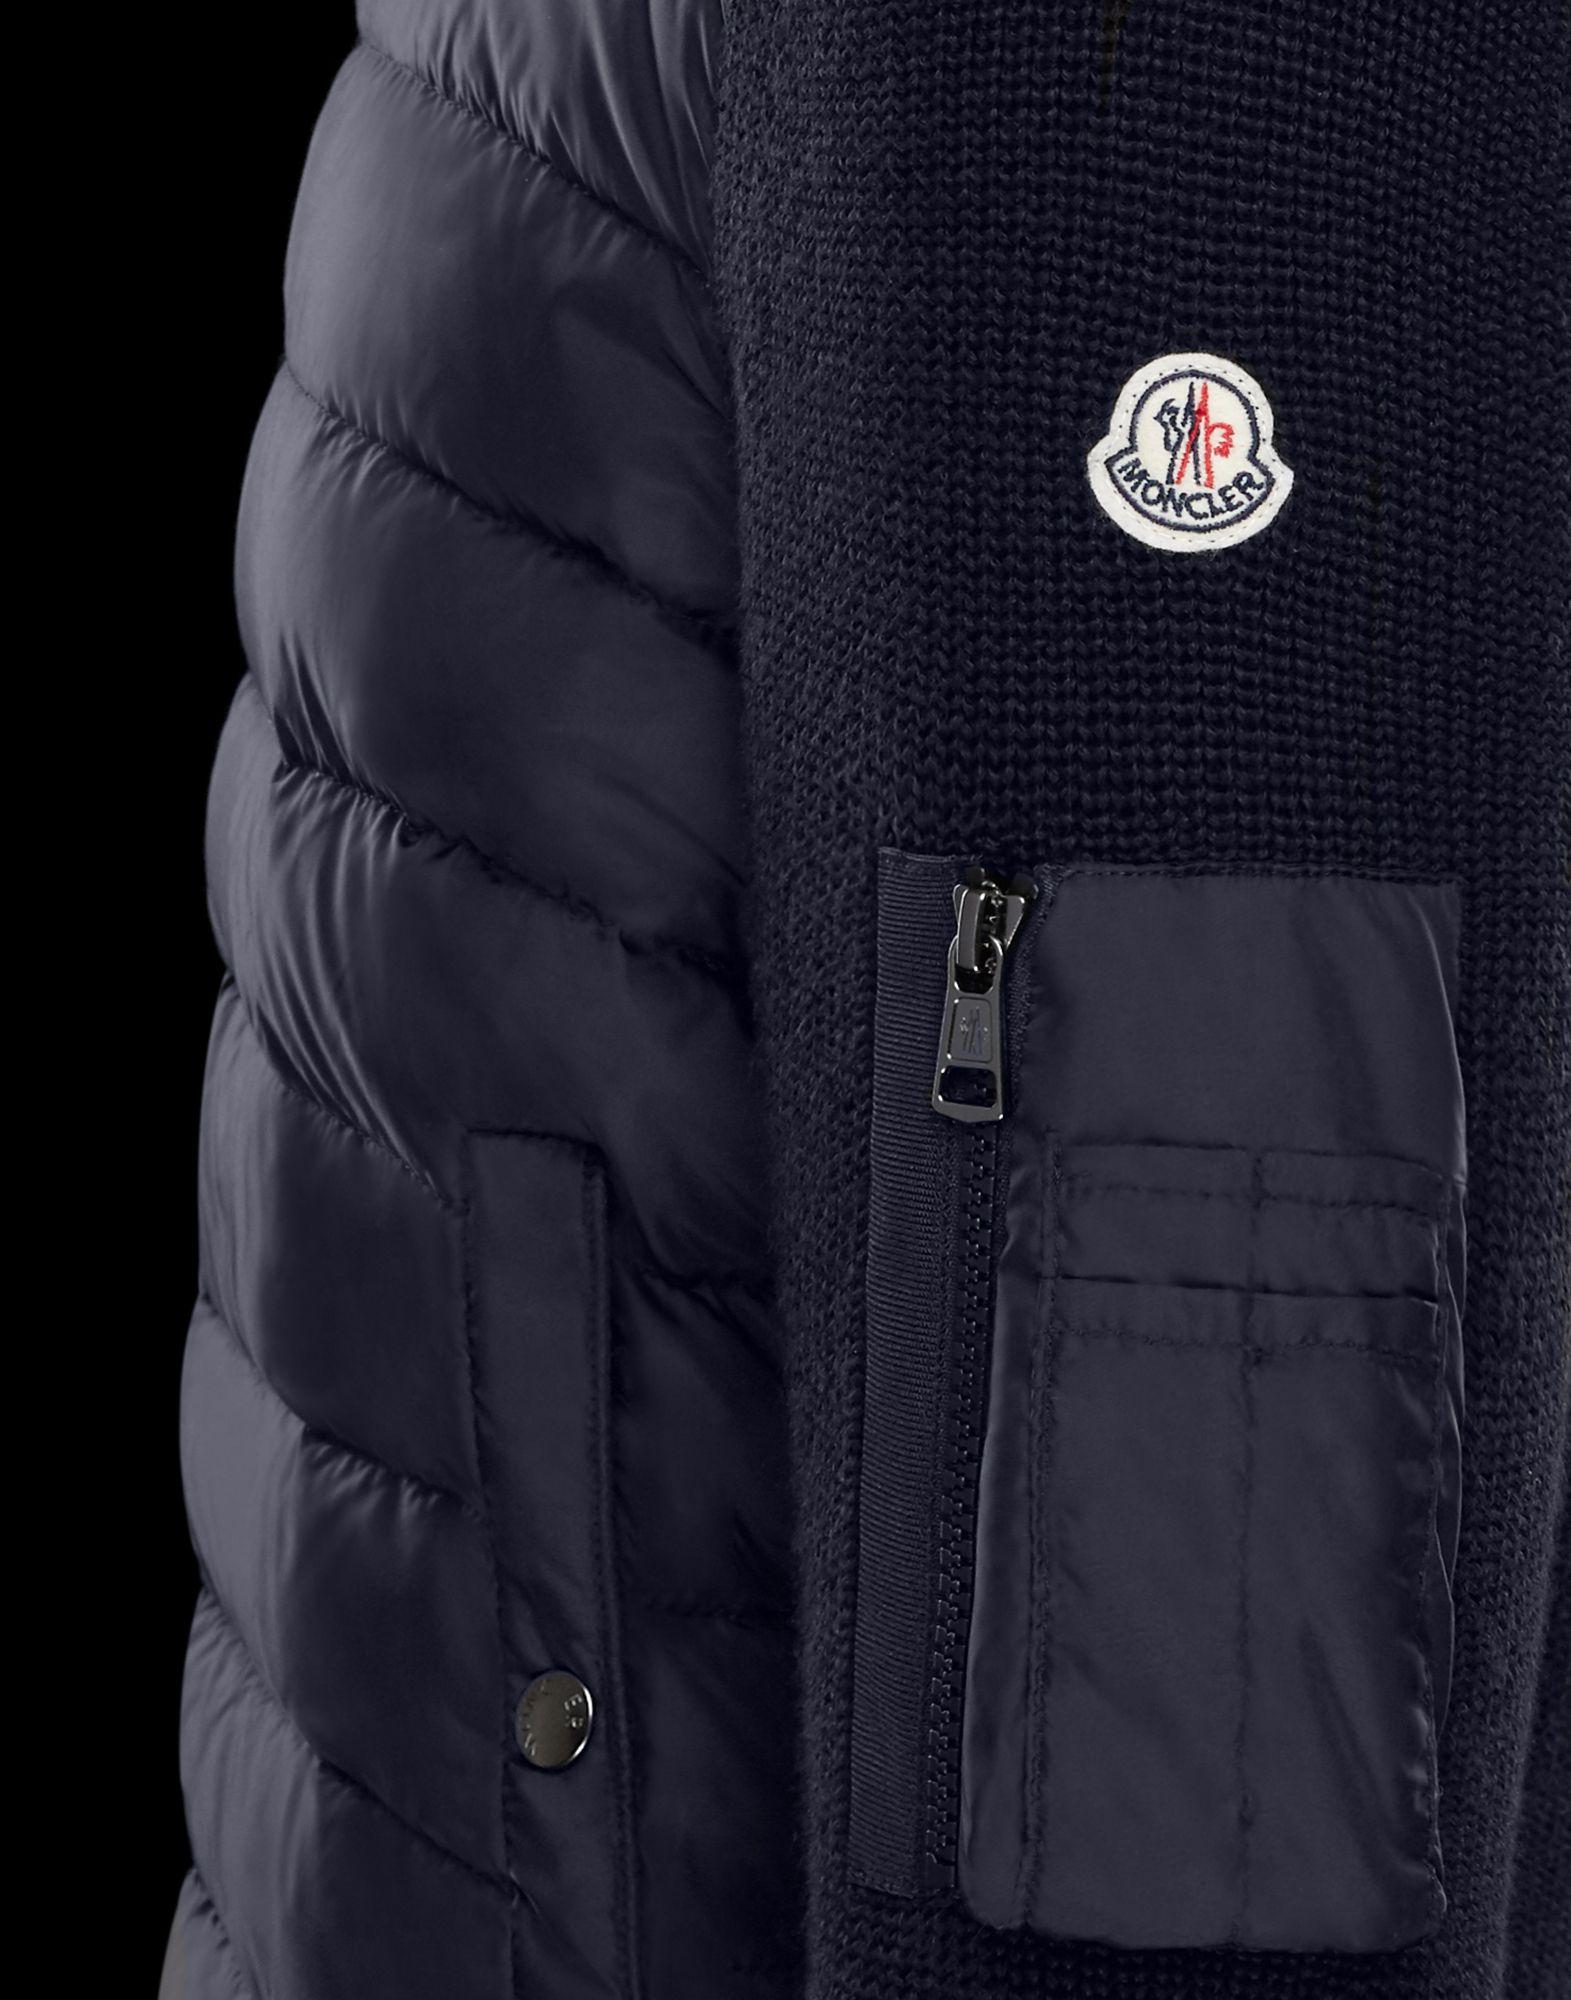 Moncler Synthetic Lined Sweater in Blue for Men - Lyst